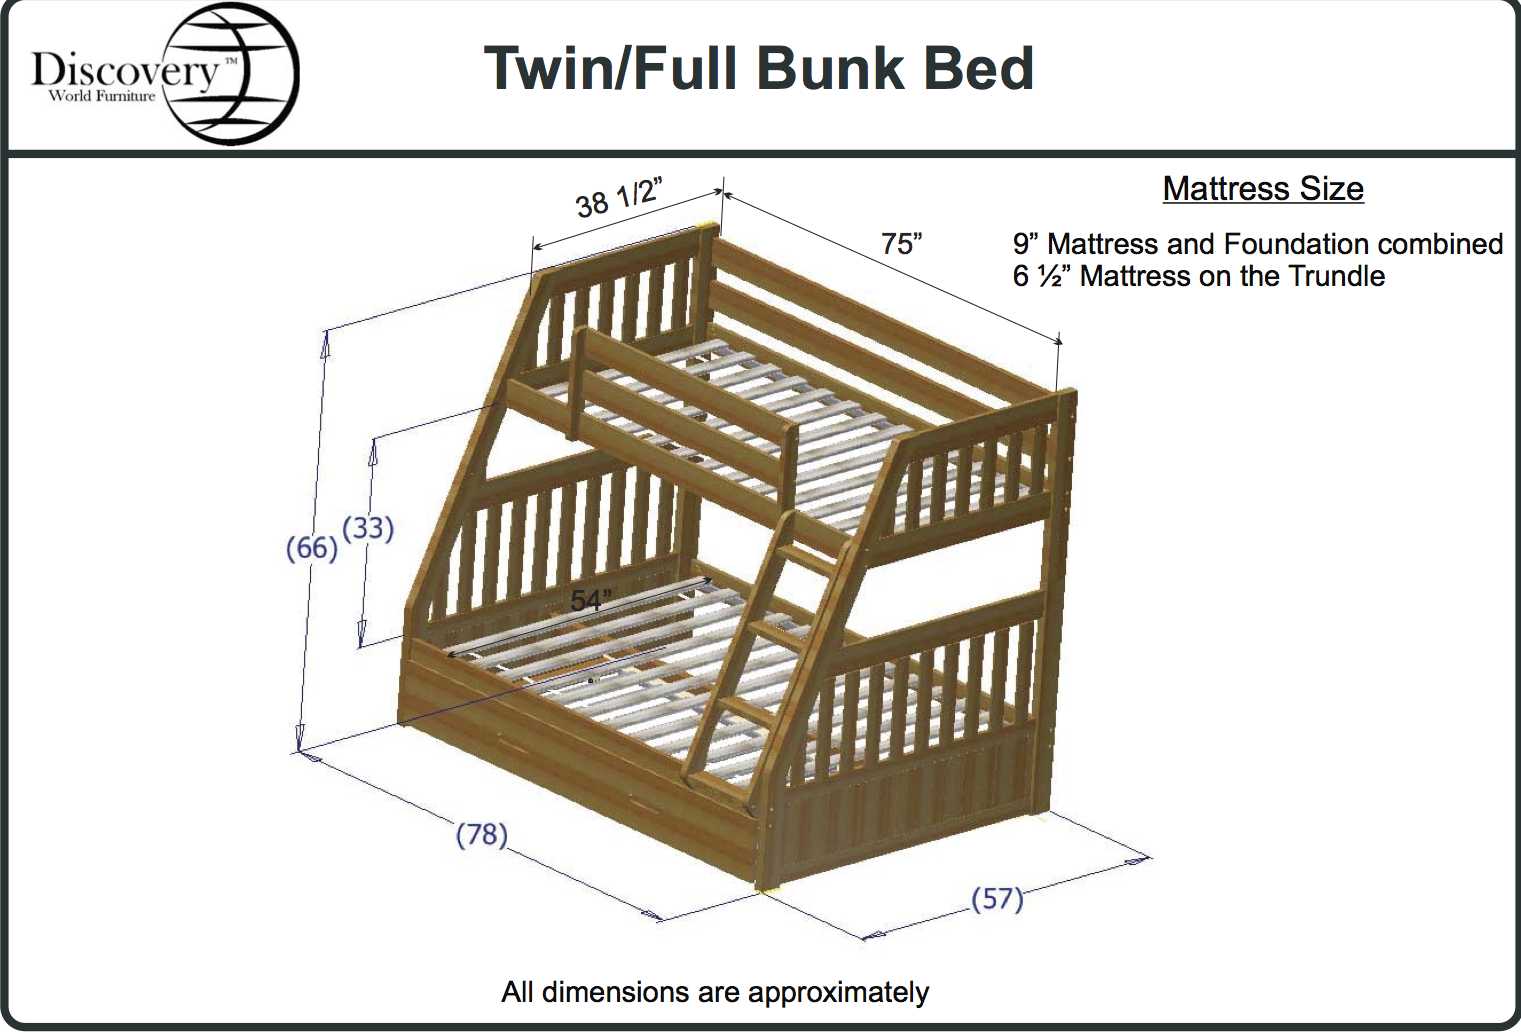 Bunk Beds With Storage Twin Over Full Bunk Beds Full Over Full Bunk ...